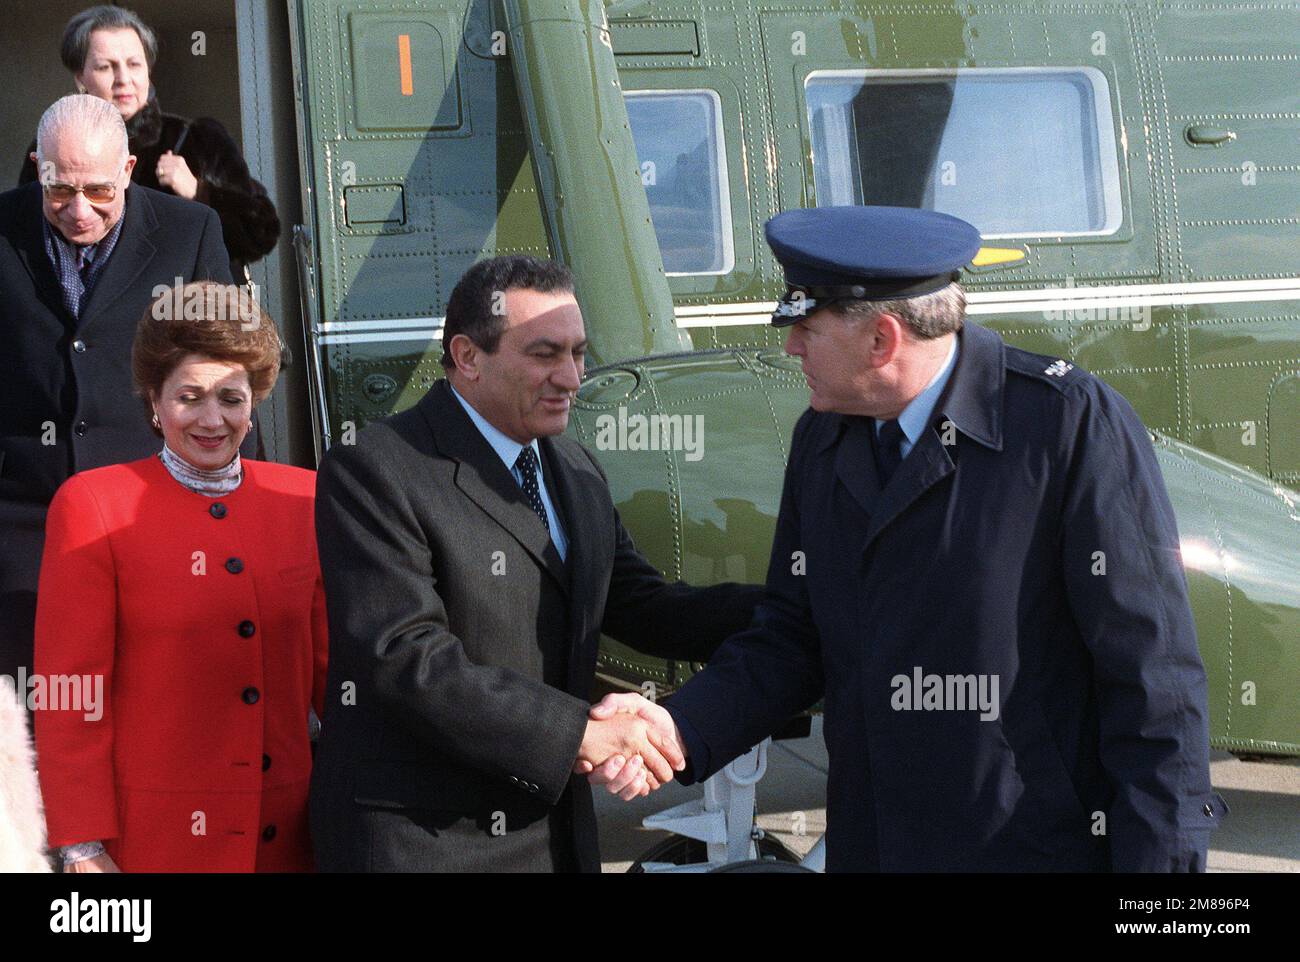 Egyptian President Mohammed Hosni Mubarak and his wife are met by COL John Bacs, Vice Commander, Air Force District of Washington, after disembarking from a Marine Helicopter Squadron 1 (HMX-1) VH-3D Sea King helicopter. The Mubaraks and their party have come to the base to begin their journey back to Egypt following a state visit. Base: Andrews Air Force Base State: Maryland (MD) Country: United States Of America (USA) Stock Photo